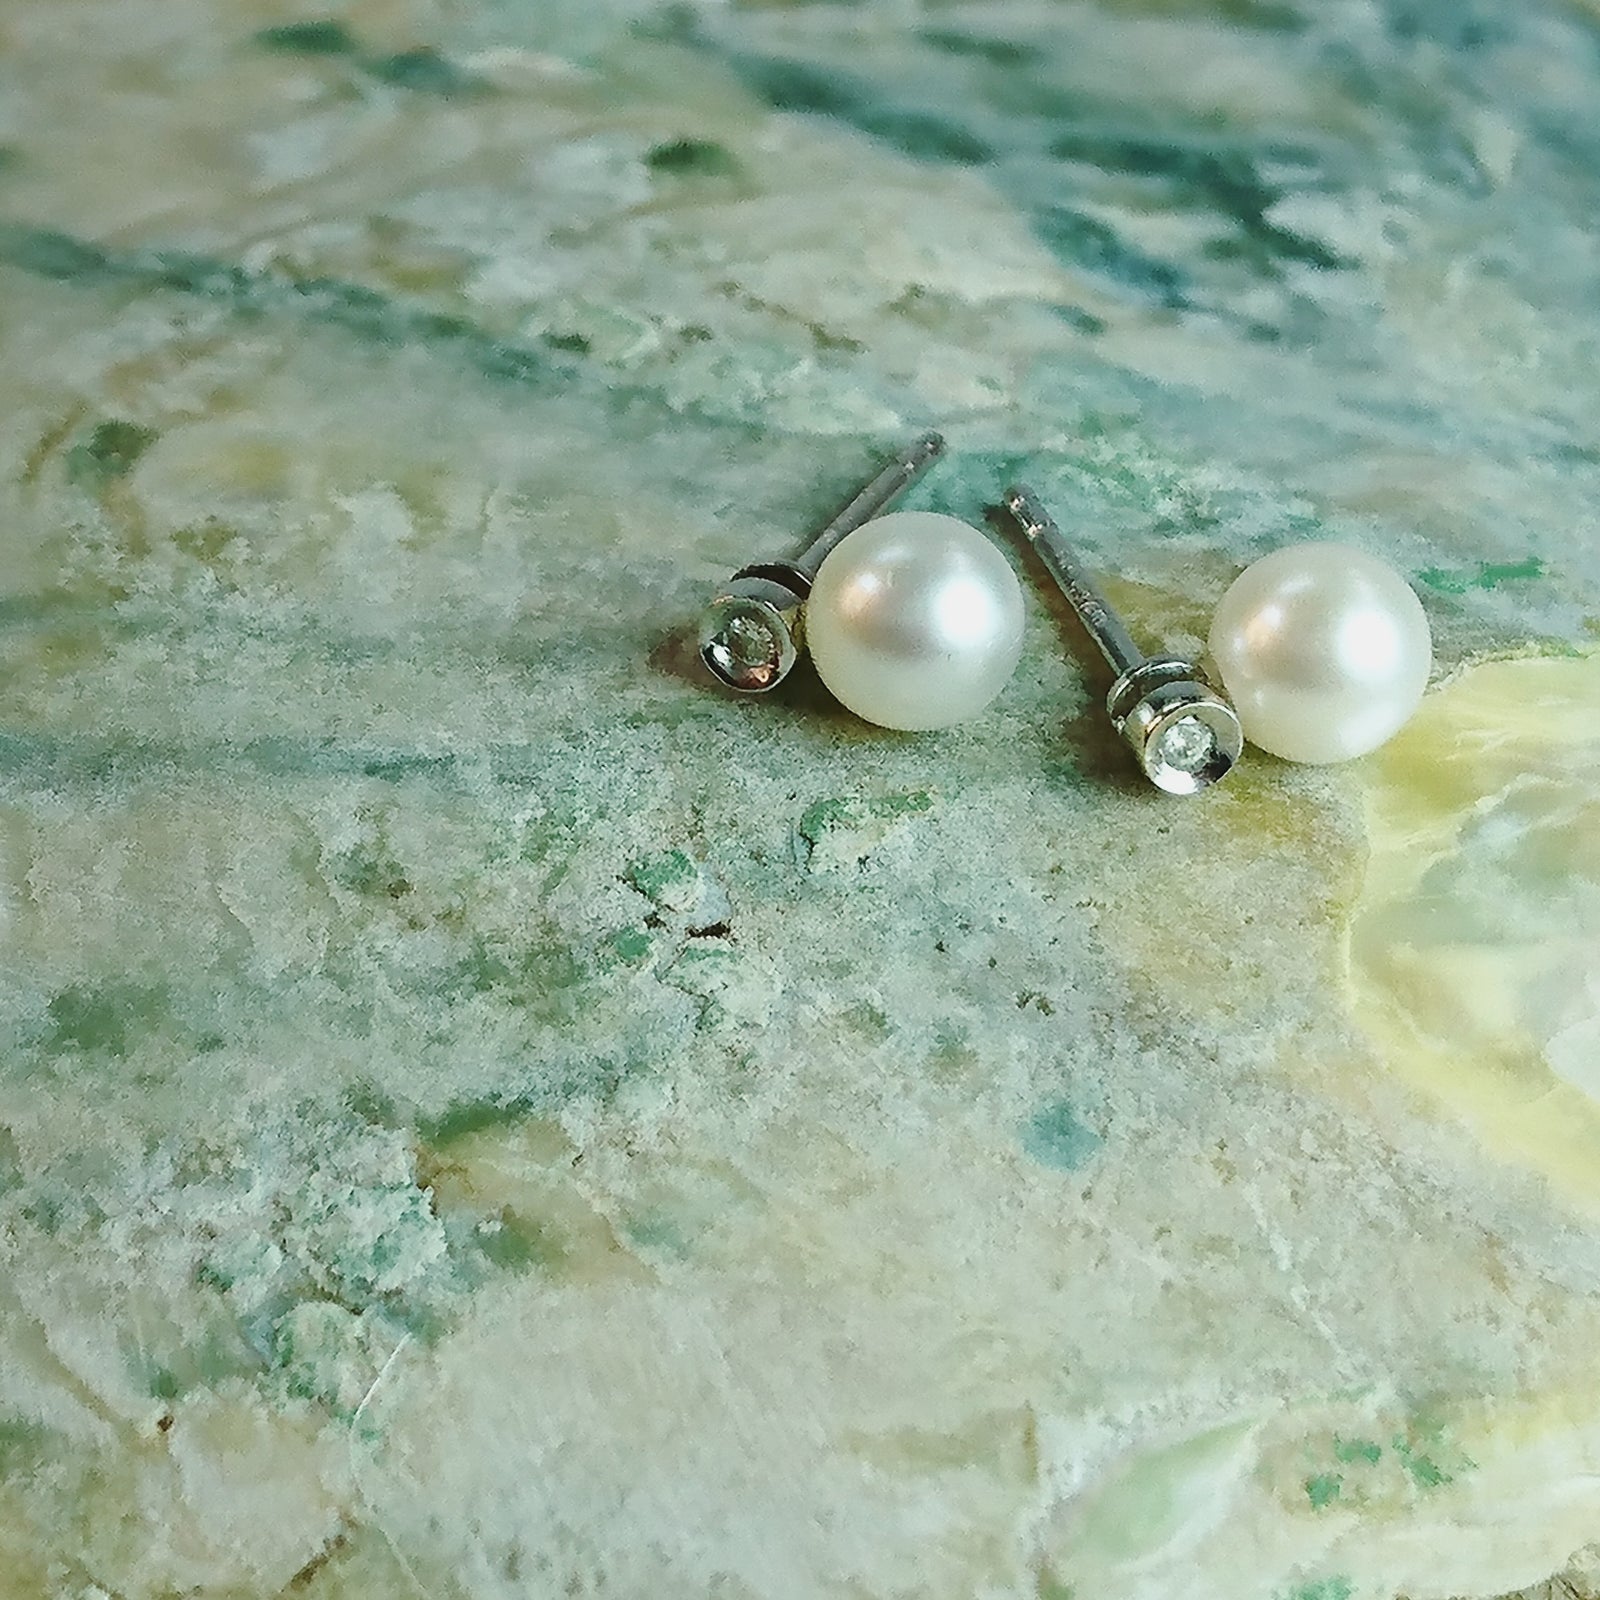 How to check if pearls are real?